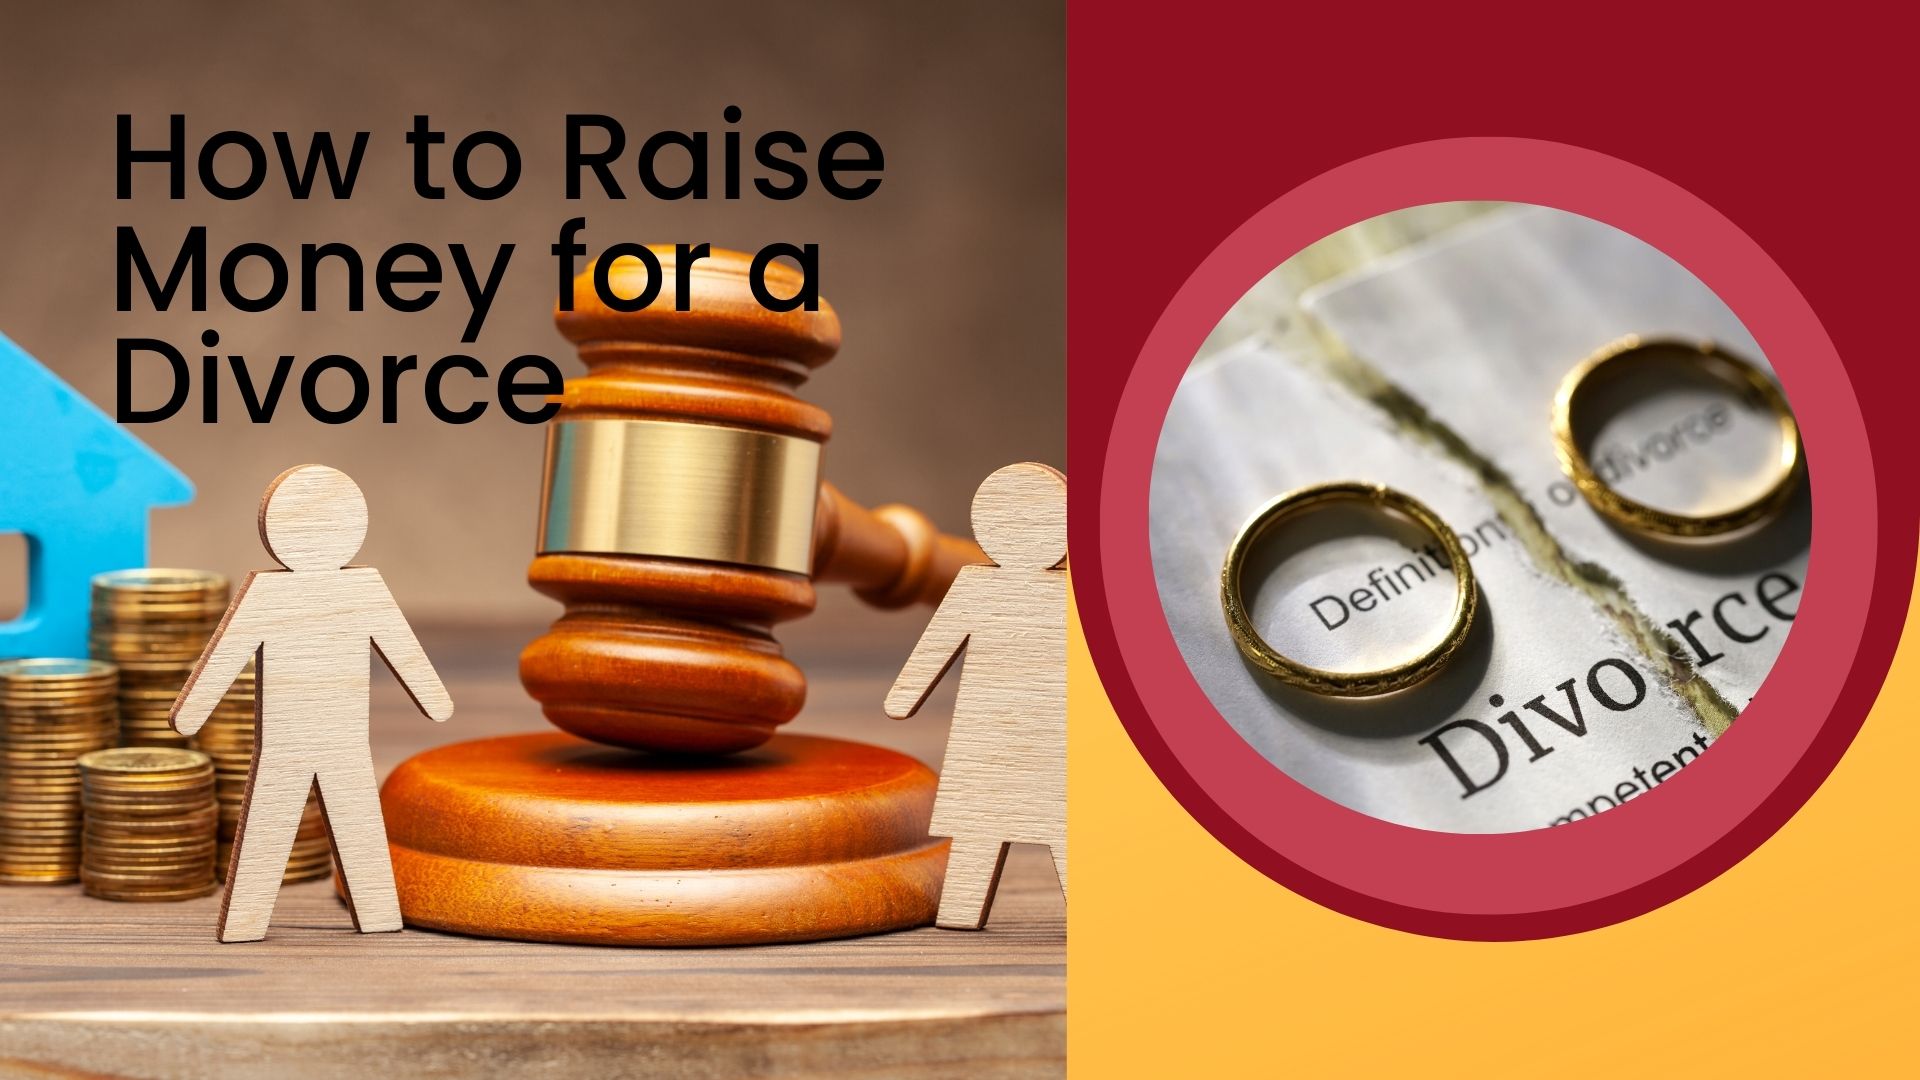 How to Raise Money for a Divorce